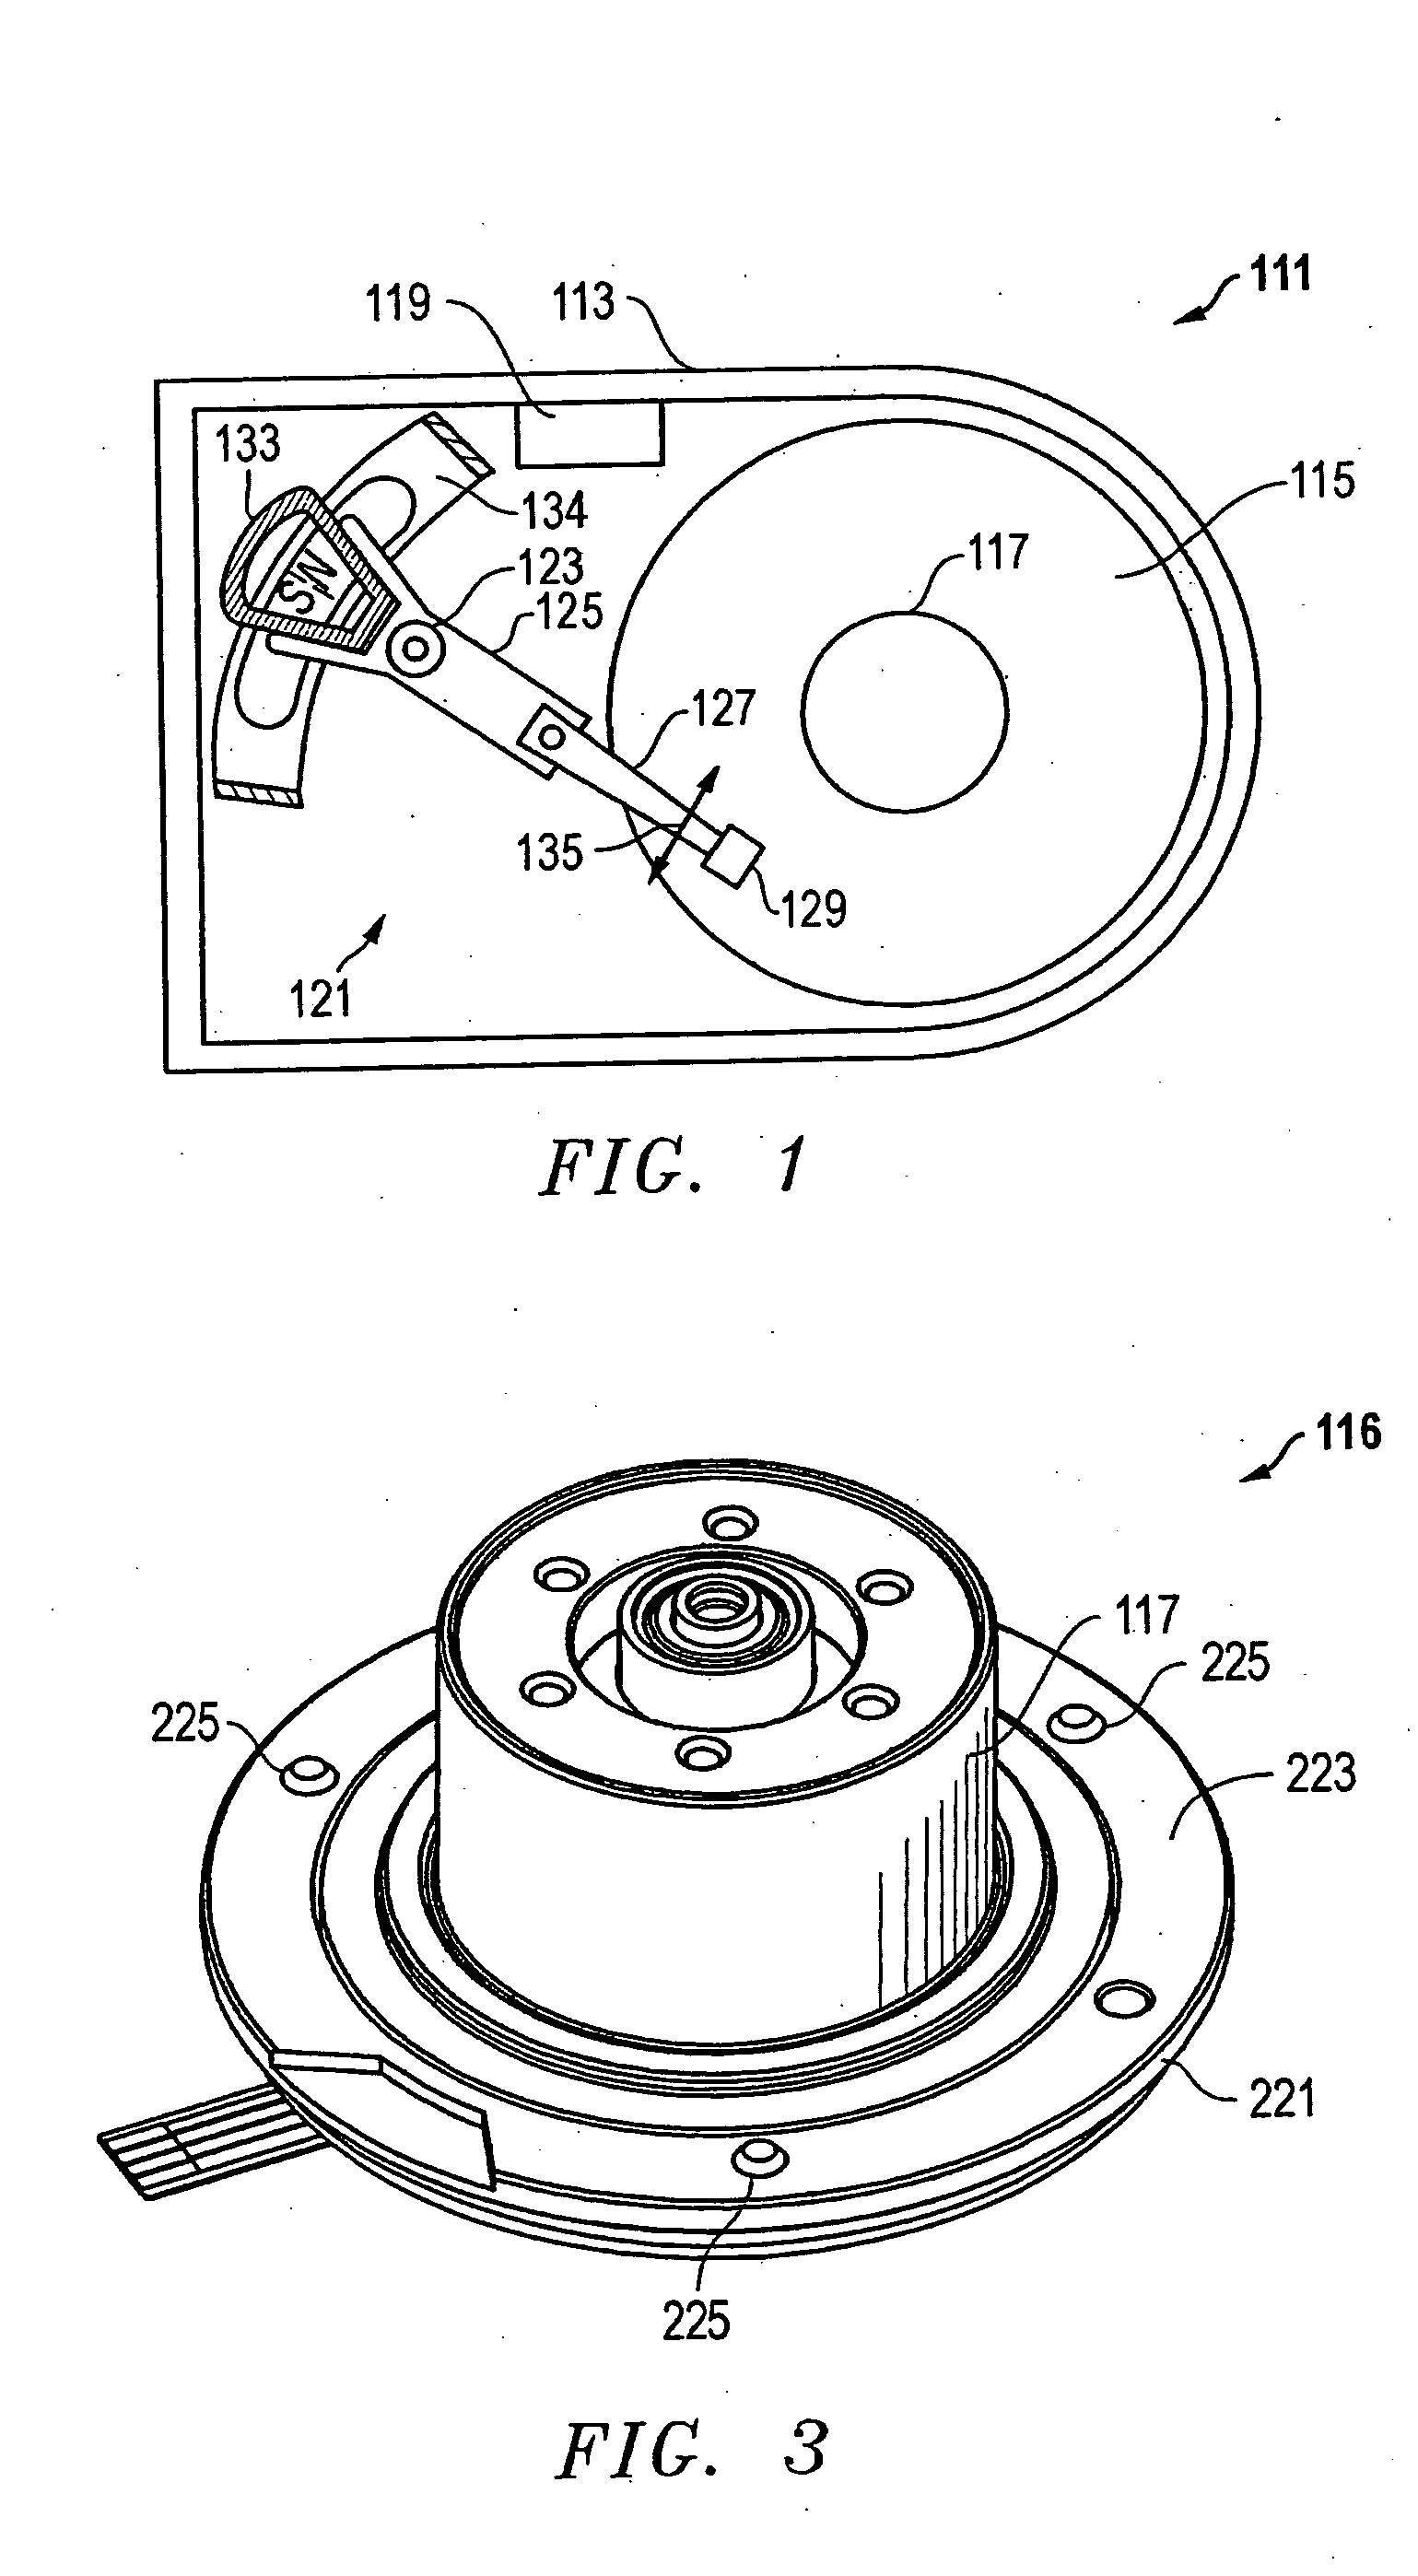 Screw attachment from exterior of disk drive enclosure for motors with mount bracket screw bolt pattern diameter larger than the motor hub outside diameter